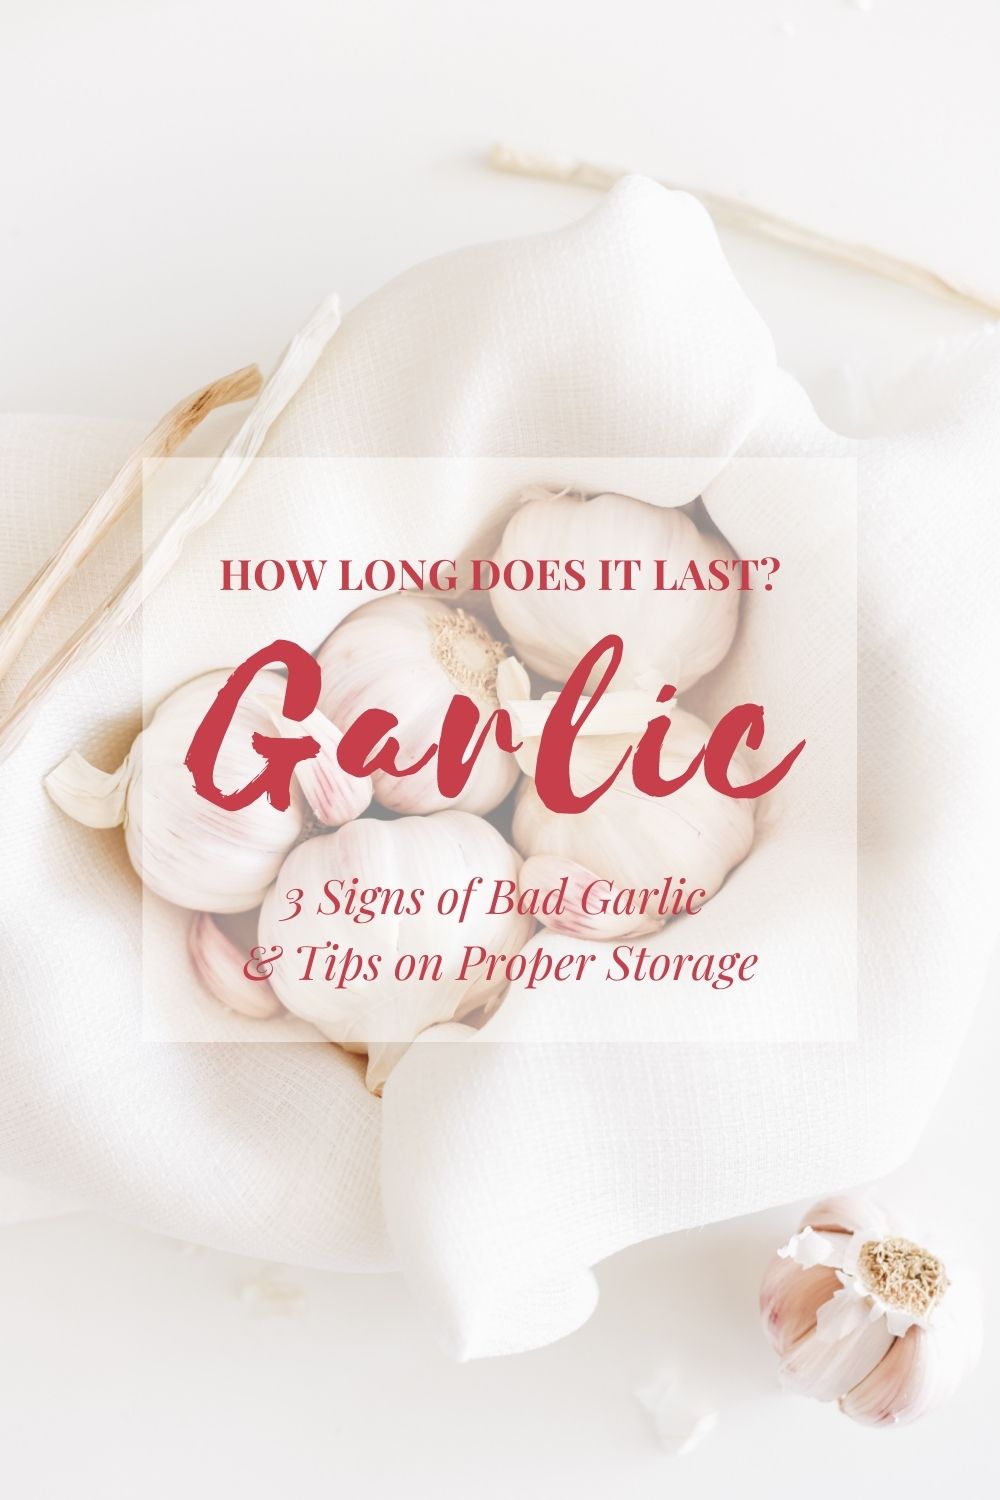 How Long Does Garlic Last? 3 Signs of Bad Garlic and Tips on Proper Storage